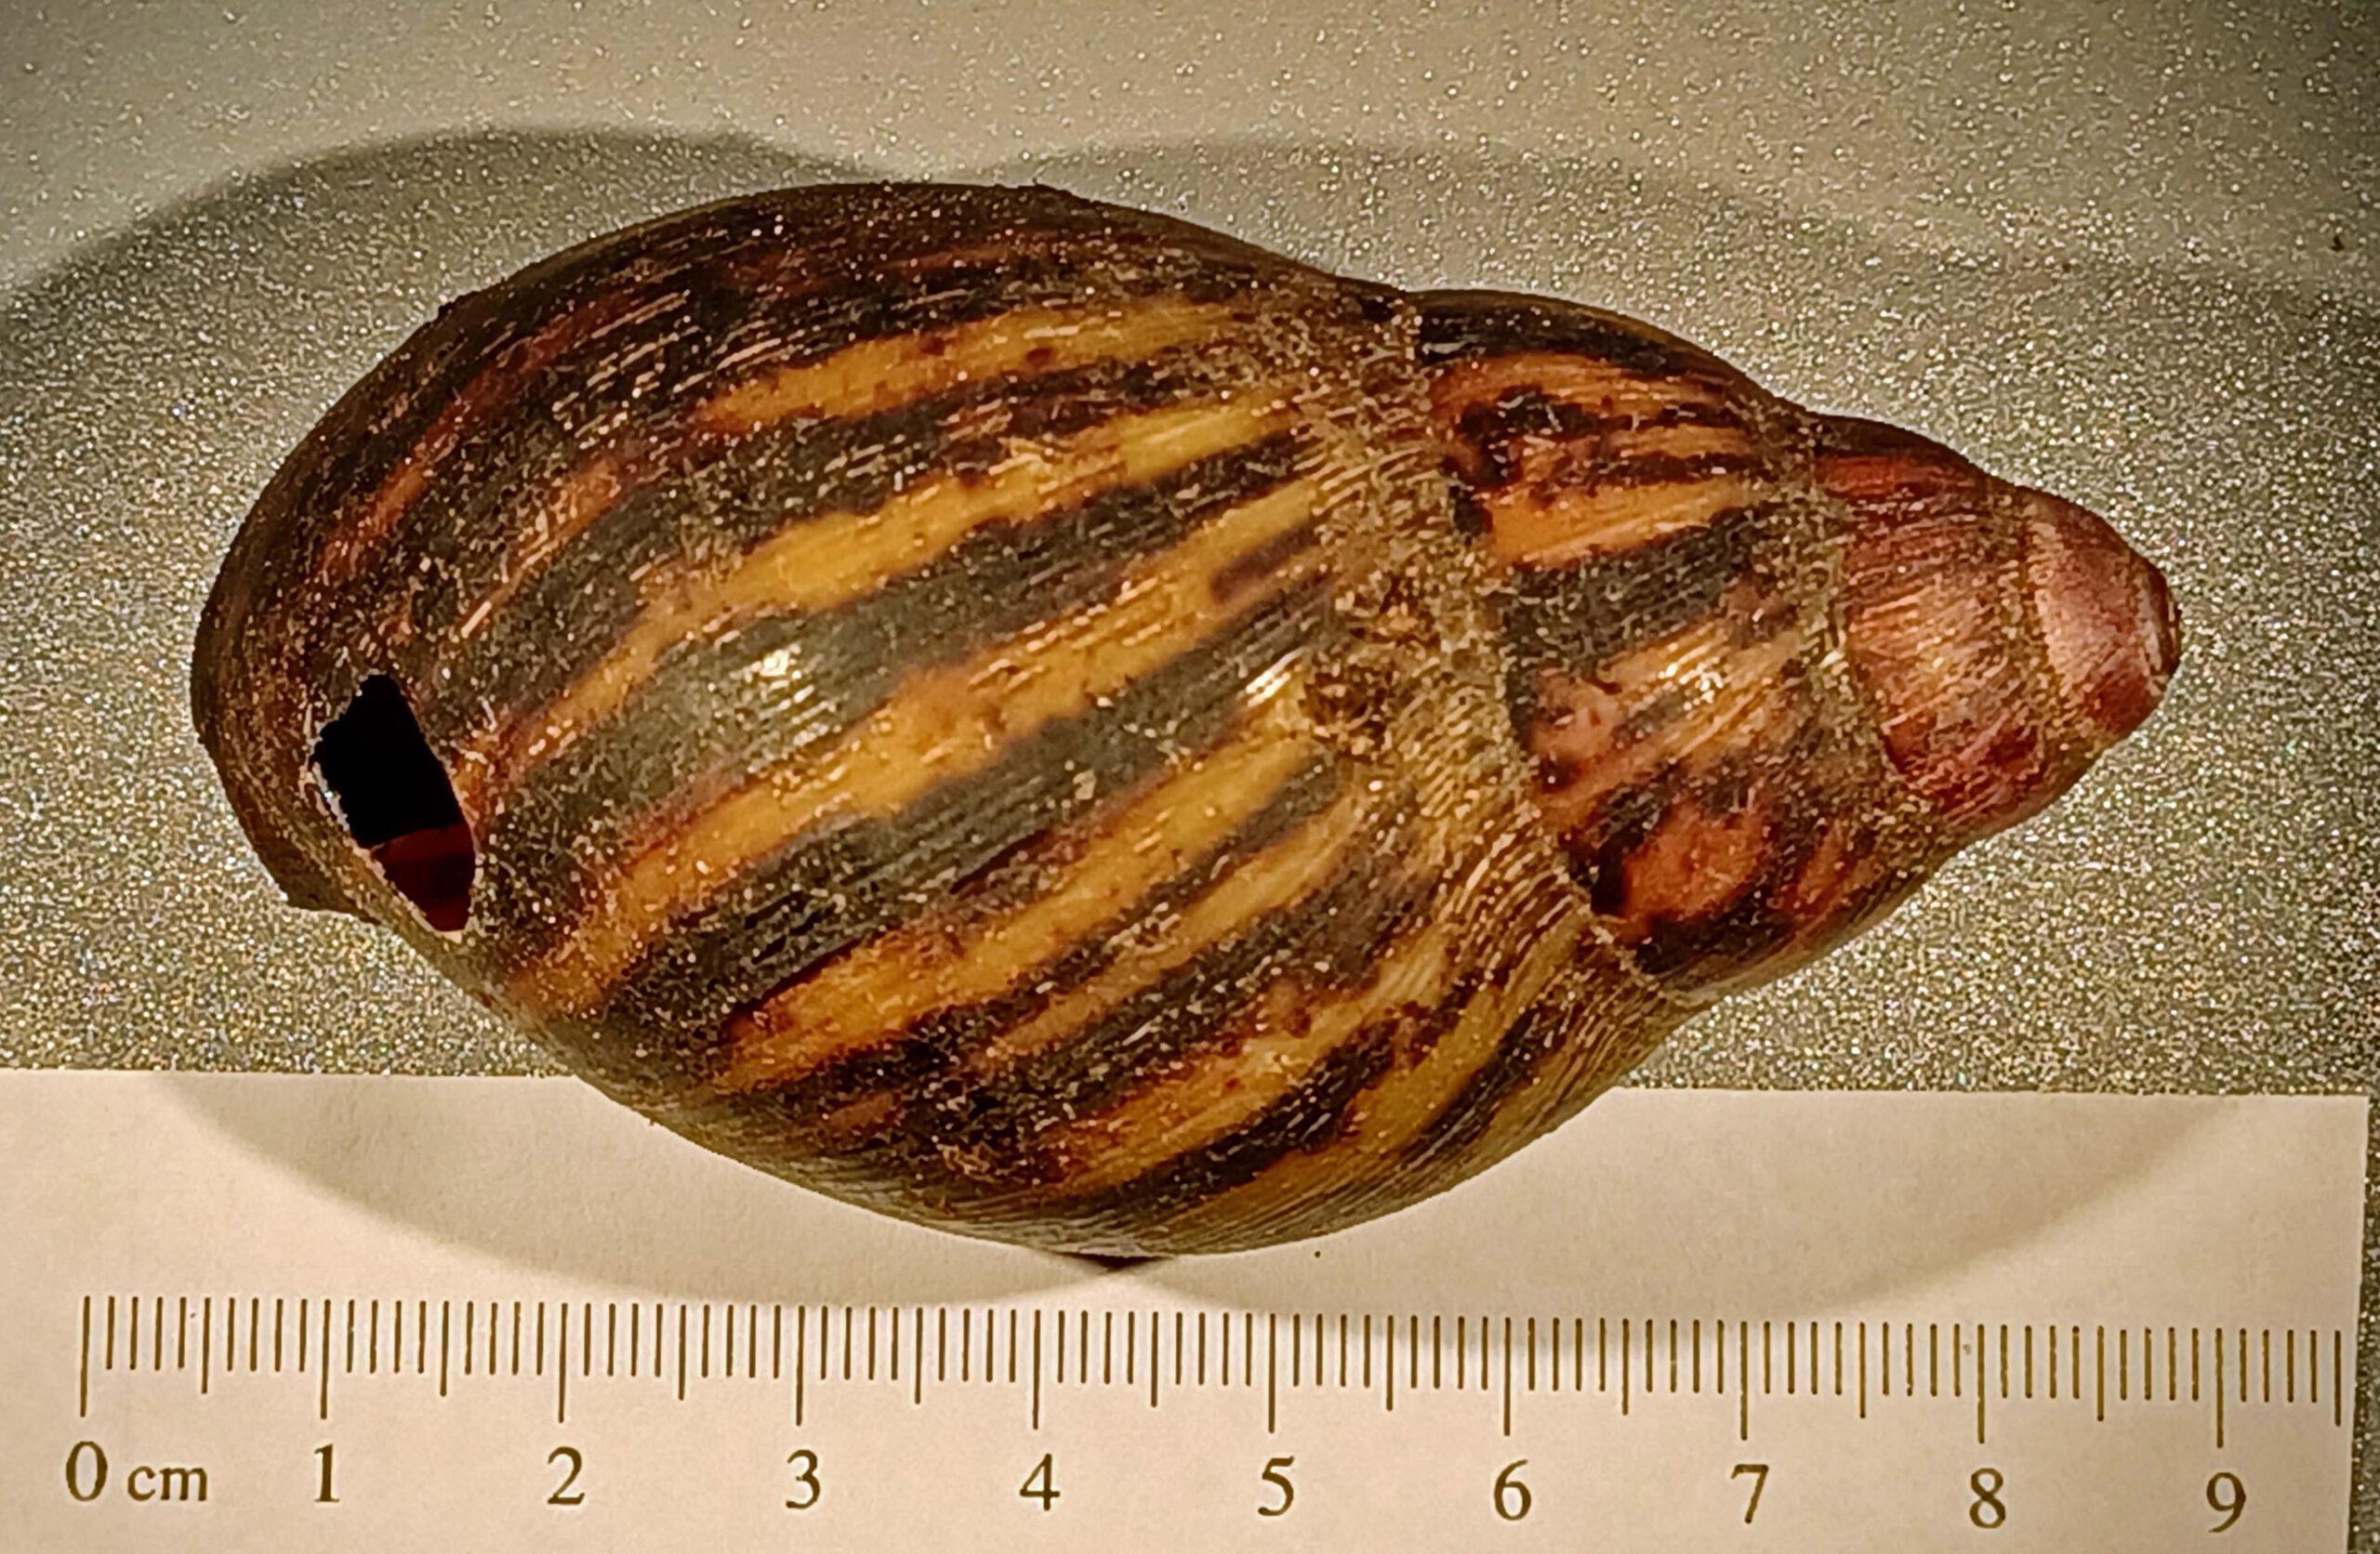 Giant snails capable of causing rare forms of meningitis seized from passenger at U.S. airport